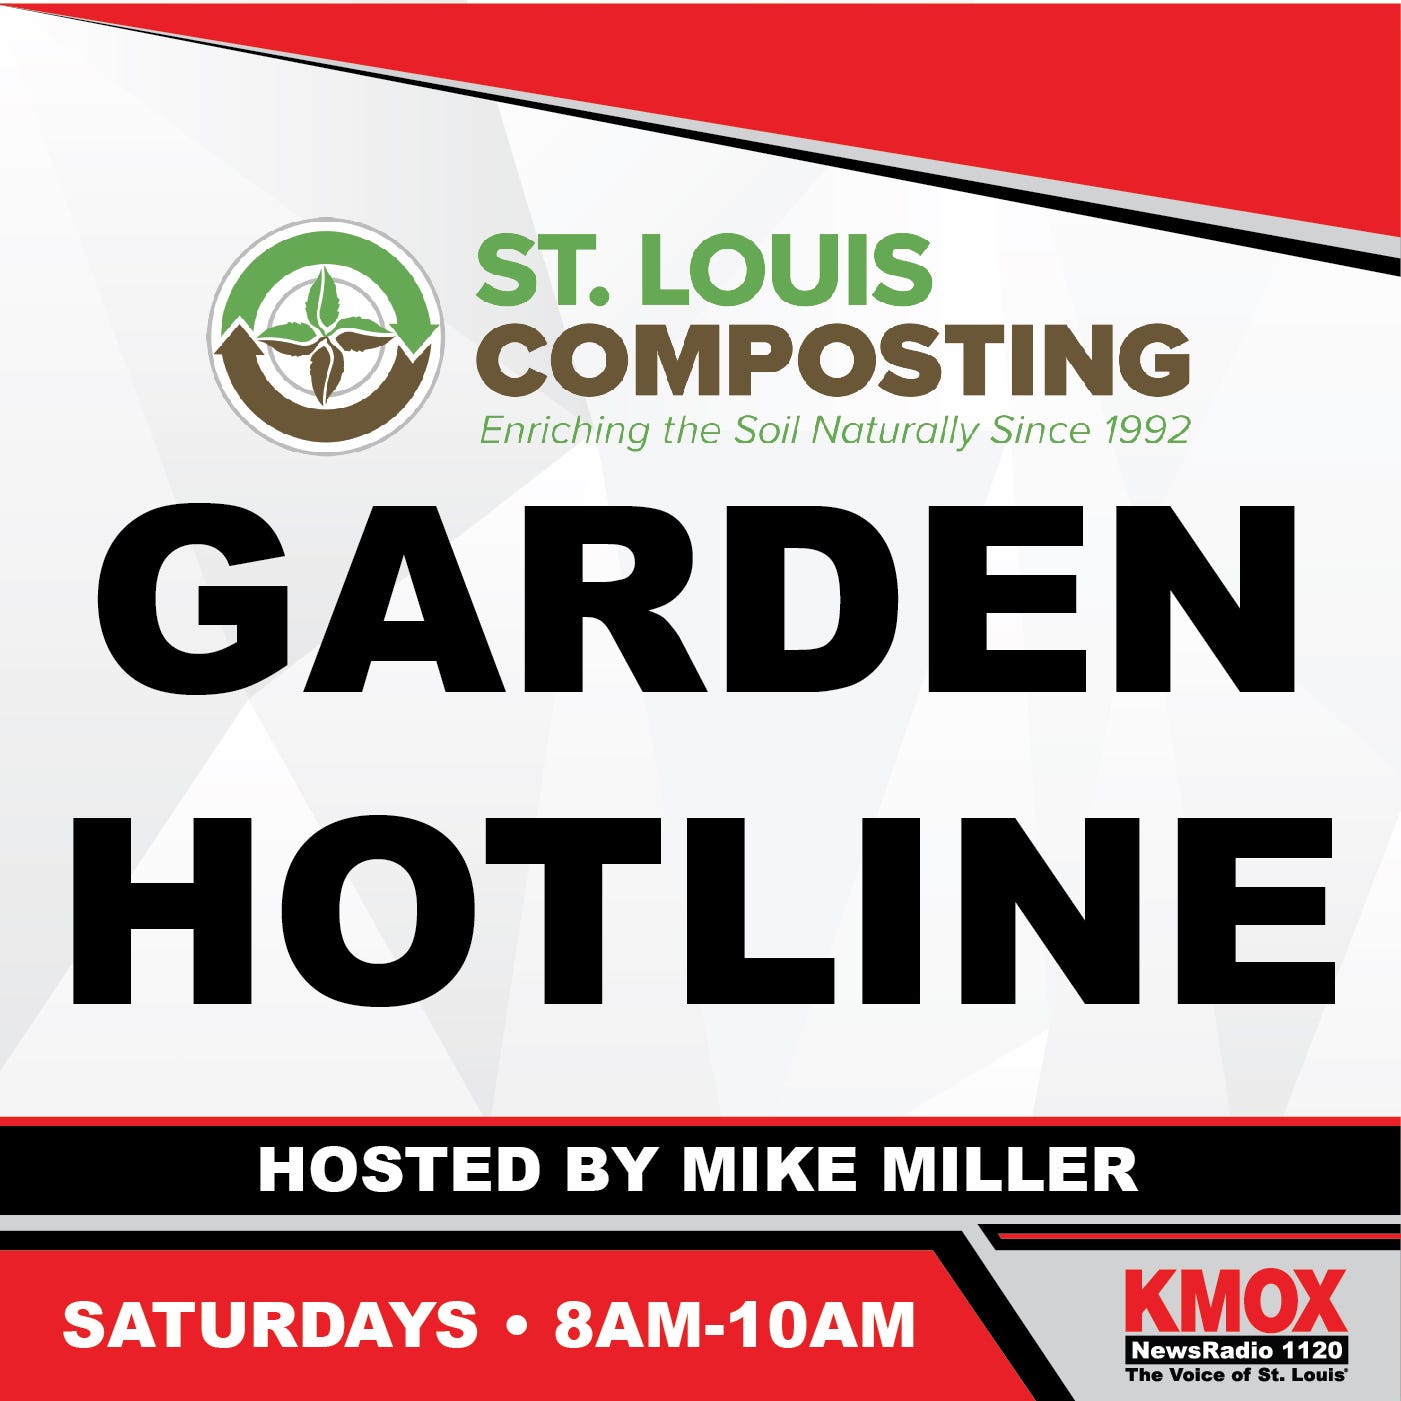 The Garden Hotline show with certified Arborist Chuck Caverly